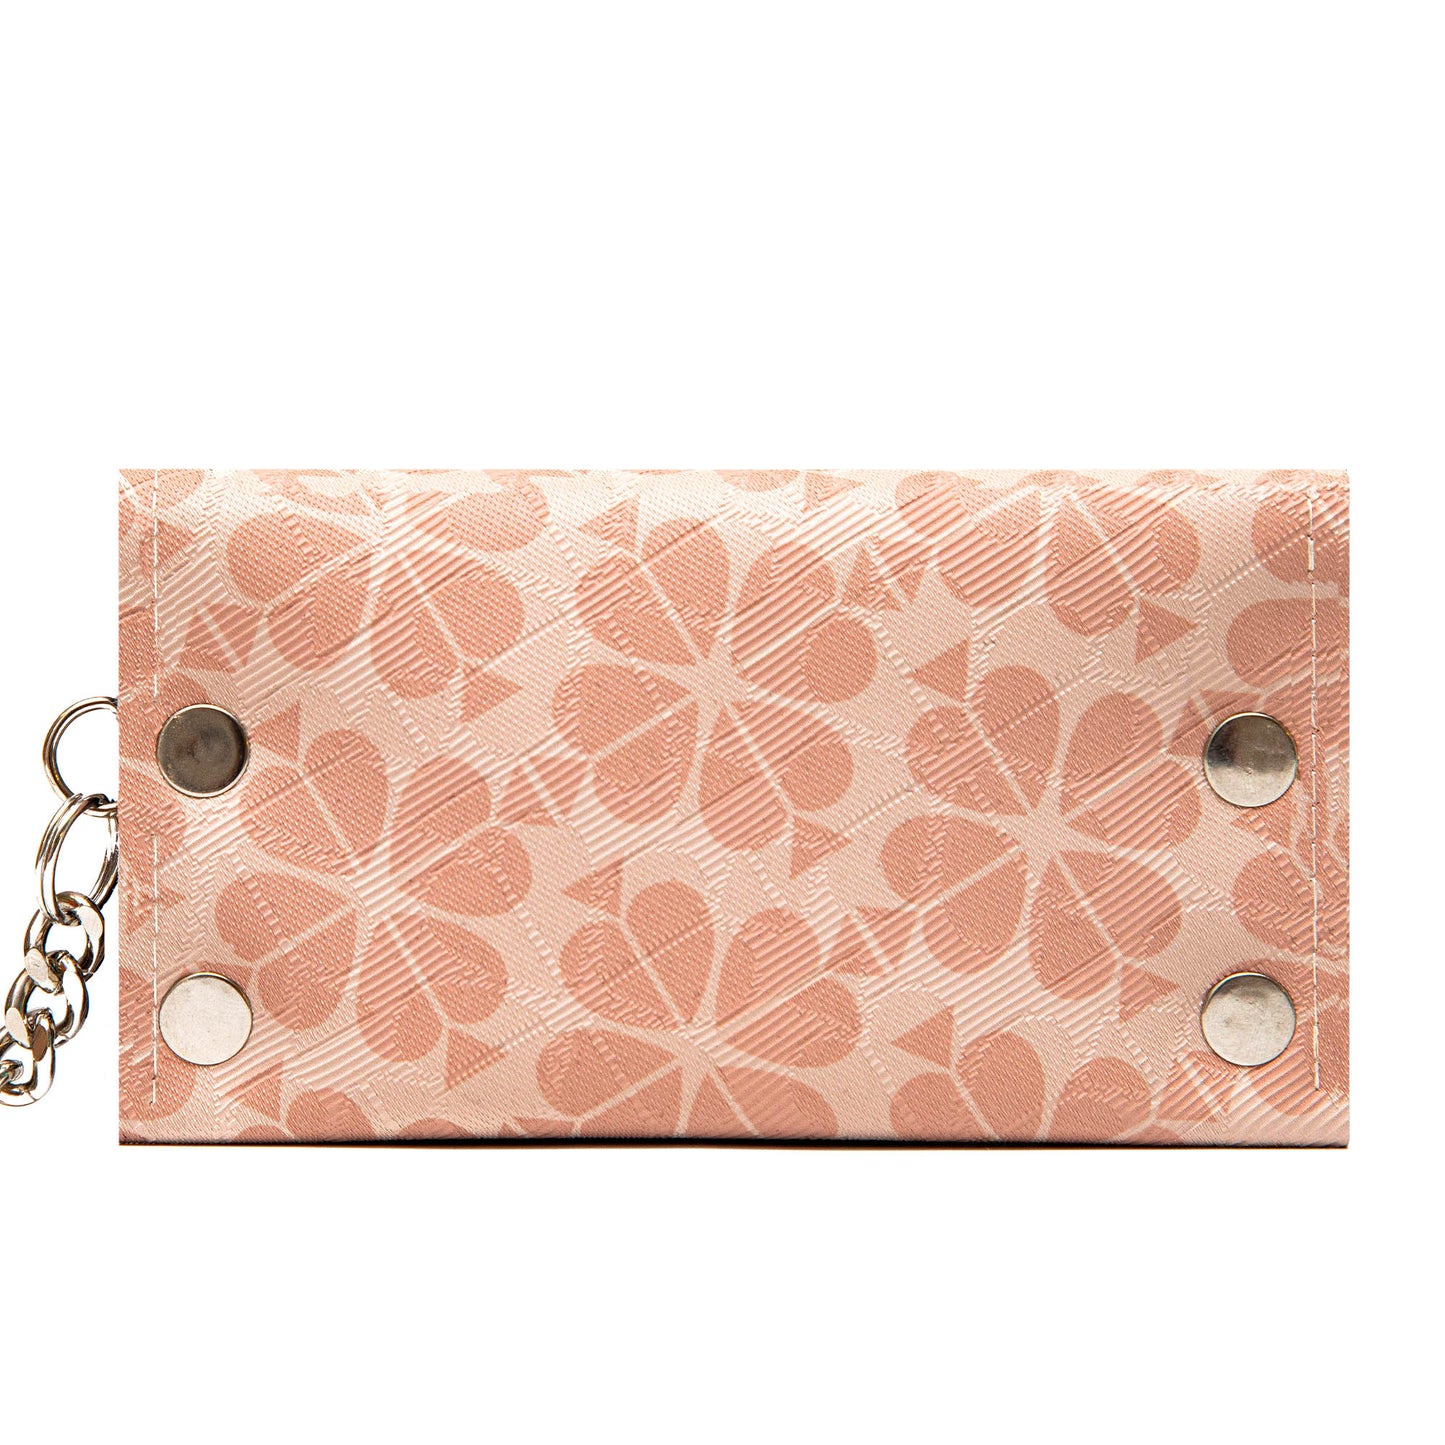 Handcrafted Biker Wallet with Detachable Chain - Cruelty-Free and Fashionably Functional - Pink Faux Leather